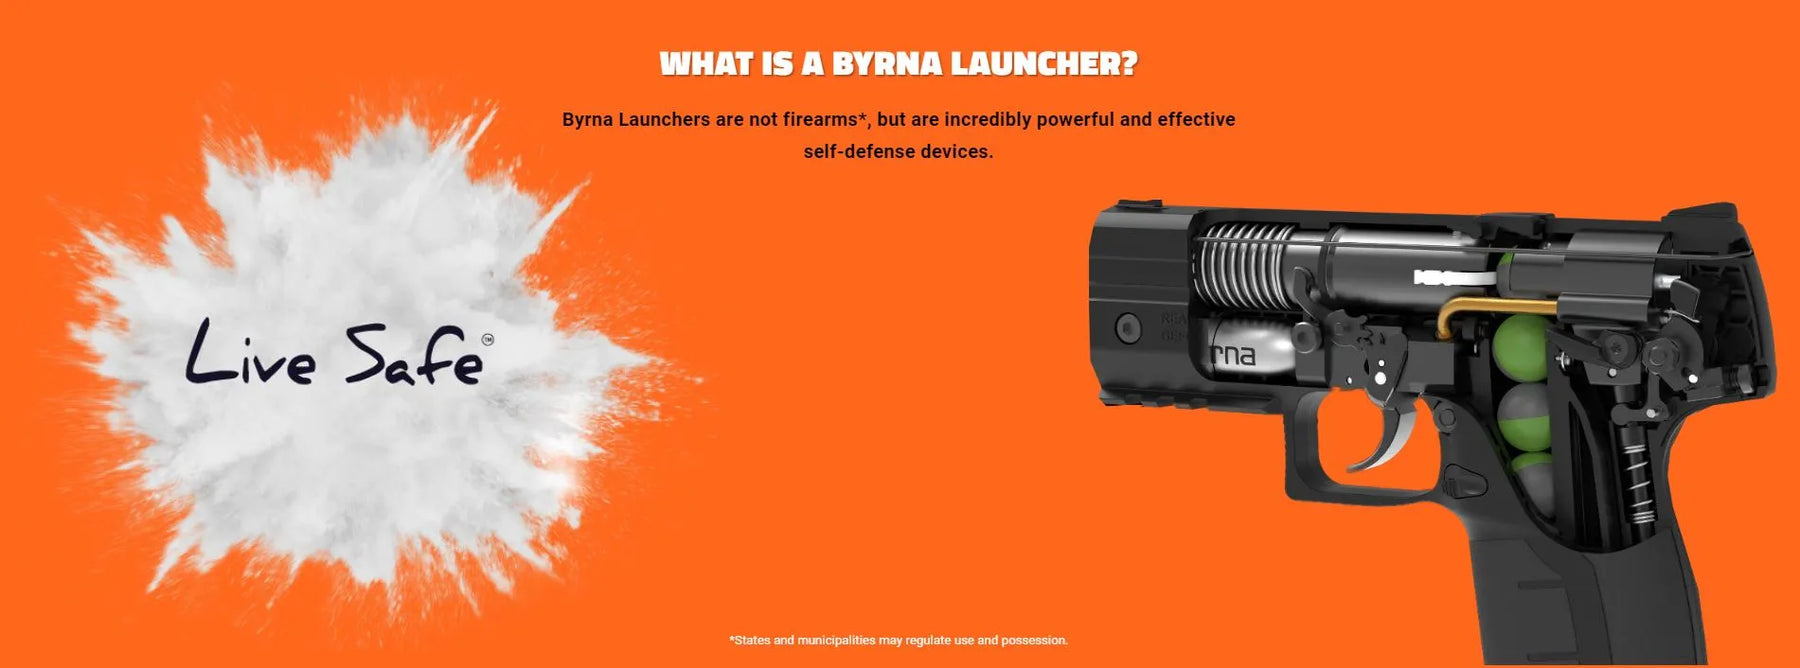 The Byrna non-lethal self defense gun can effectively Deter, Disorient, and Disarm would-be attackers at standoff distances up to 60 feet. The compact design of the Byrna is ideal for concealed-carry and can be taken virtually anywhere.